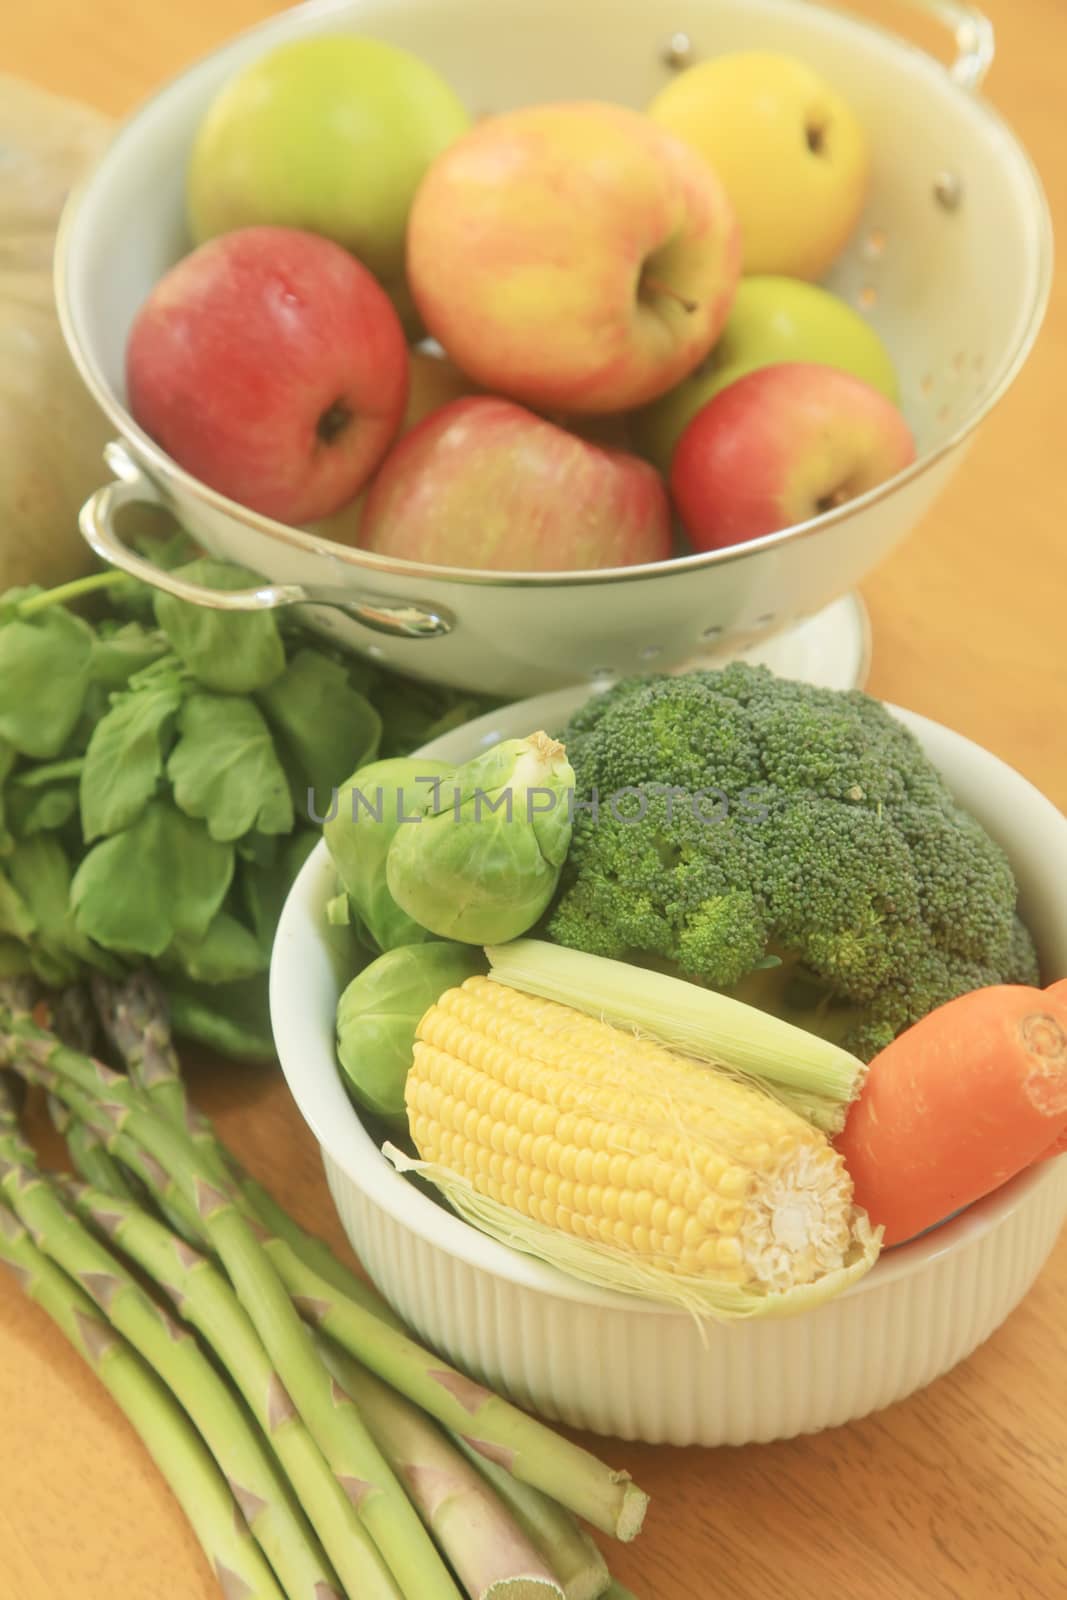 Pile of Vegetables for Cooking as Background